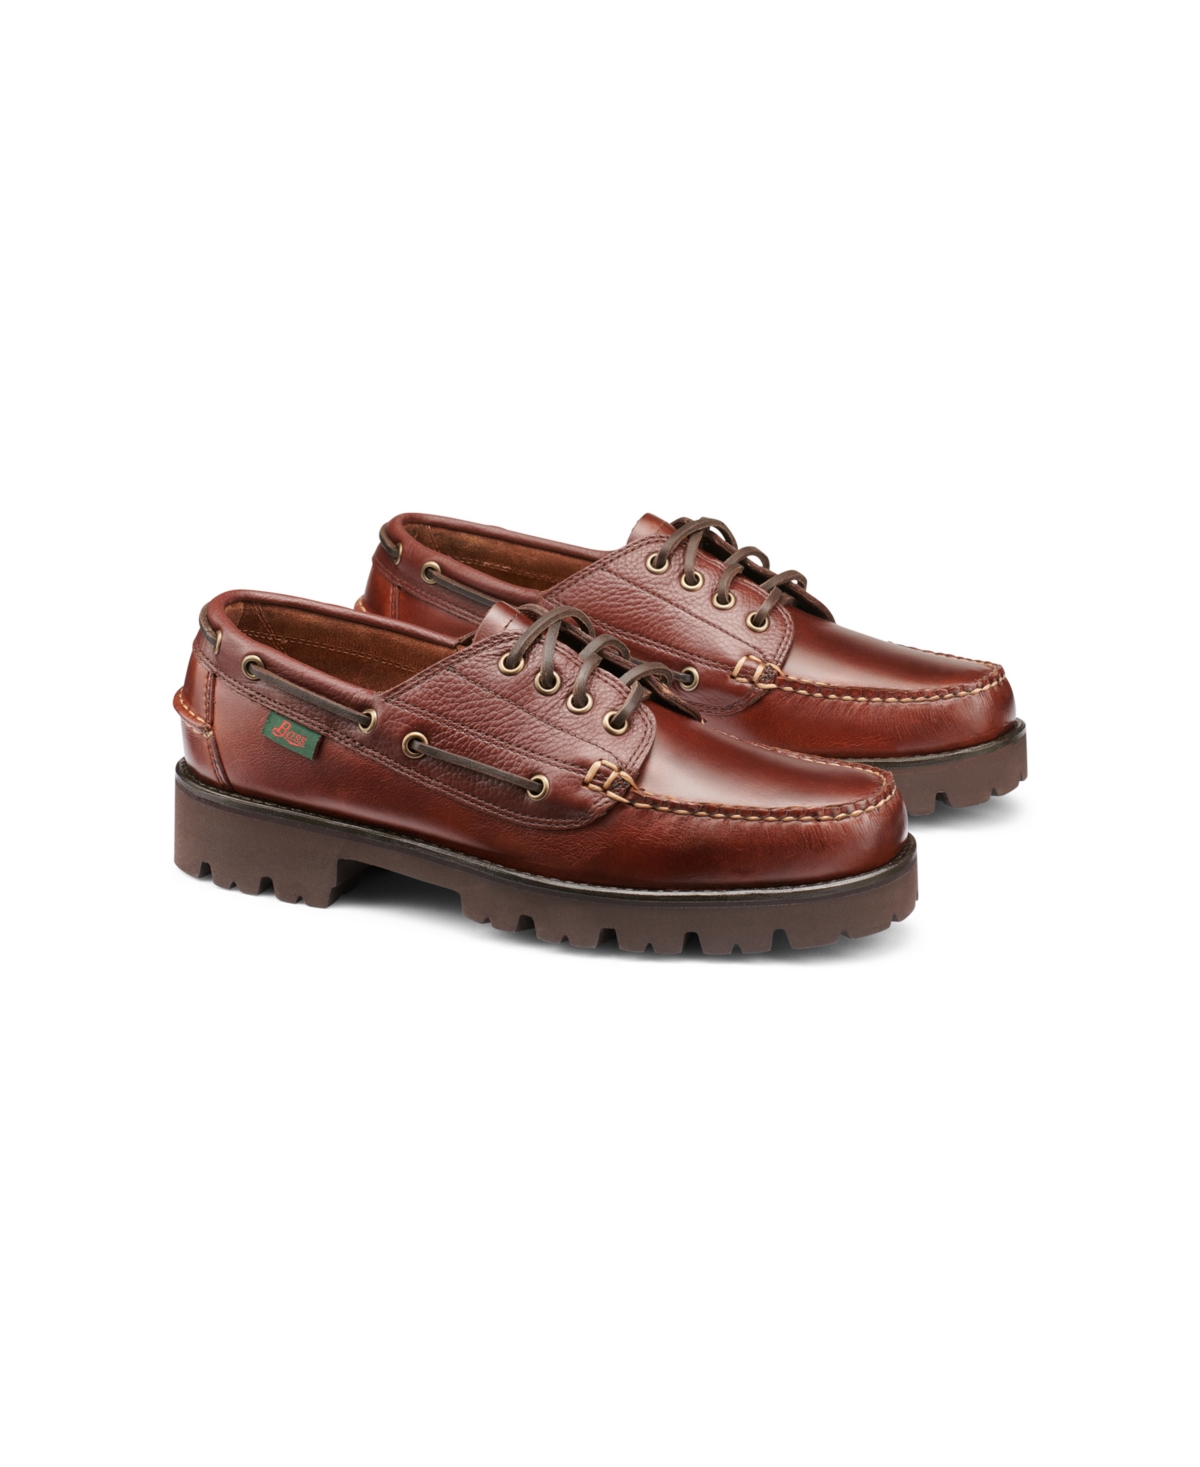 G.h. Bass & Co. G.h.bass Men's Ranger Super Lug Camp Moc Hand Sewn Boat Shoes In Brown